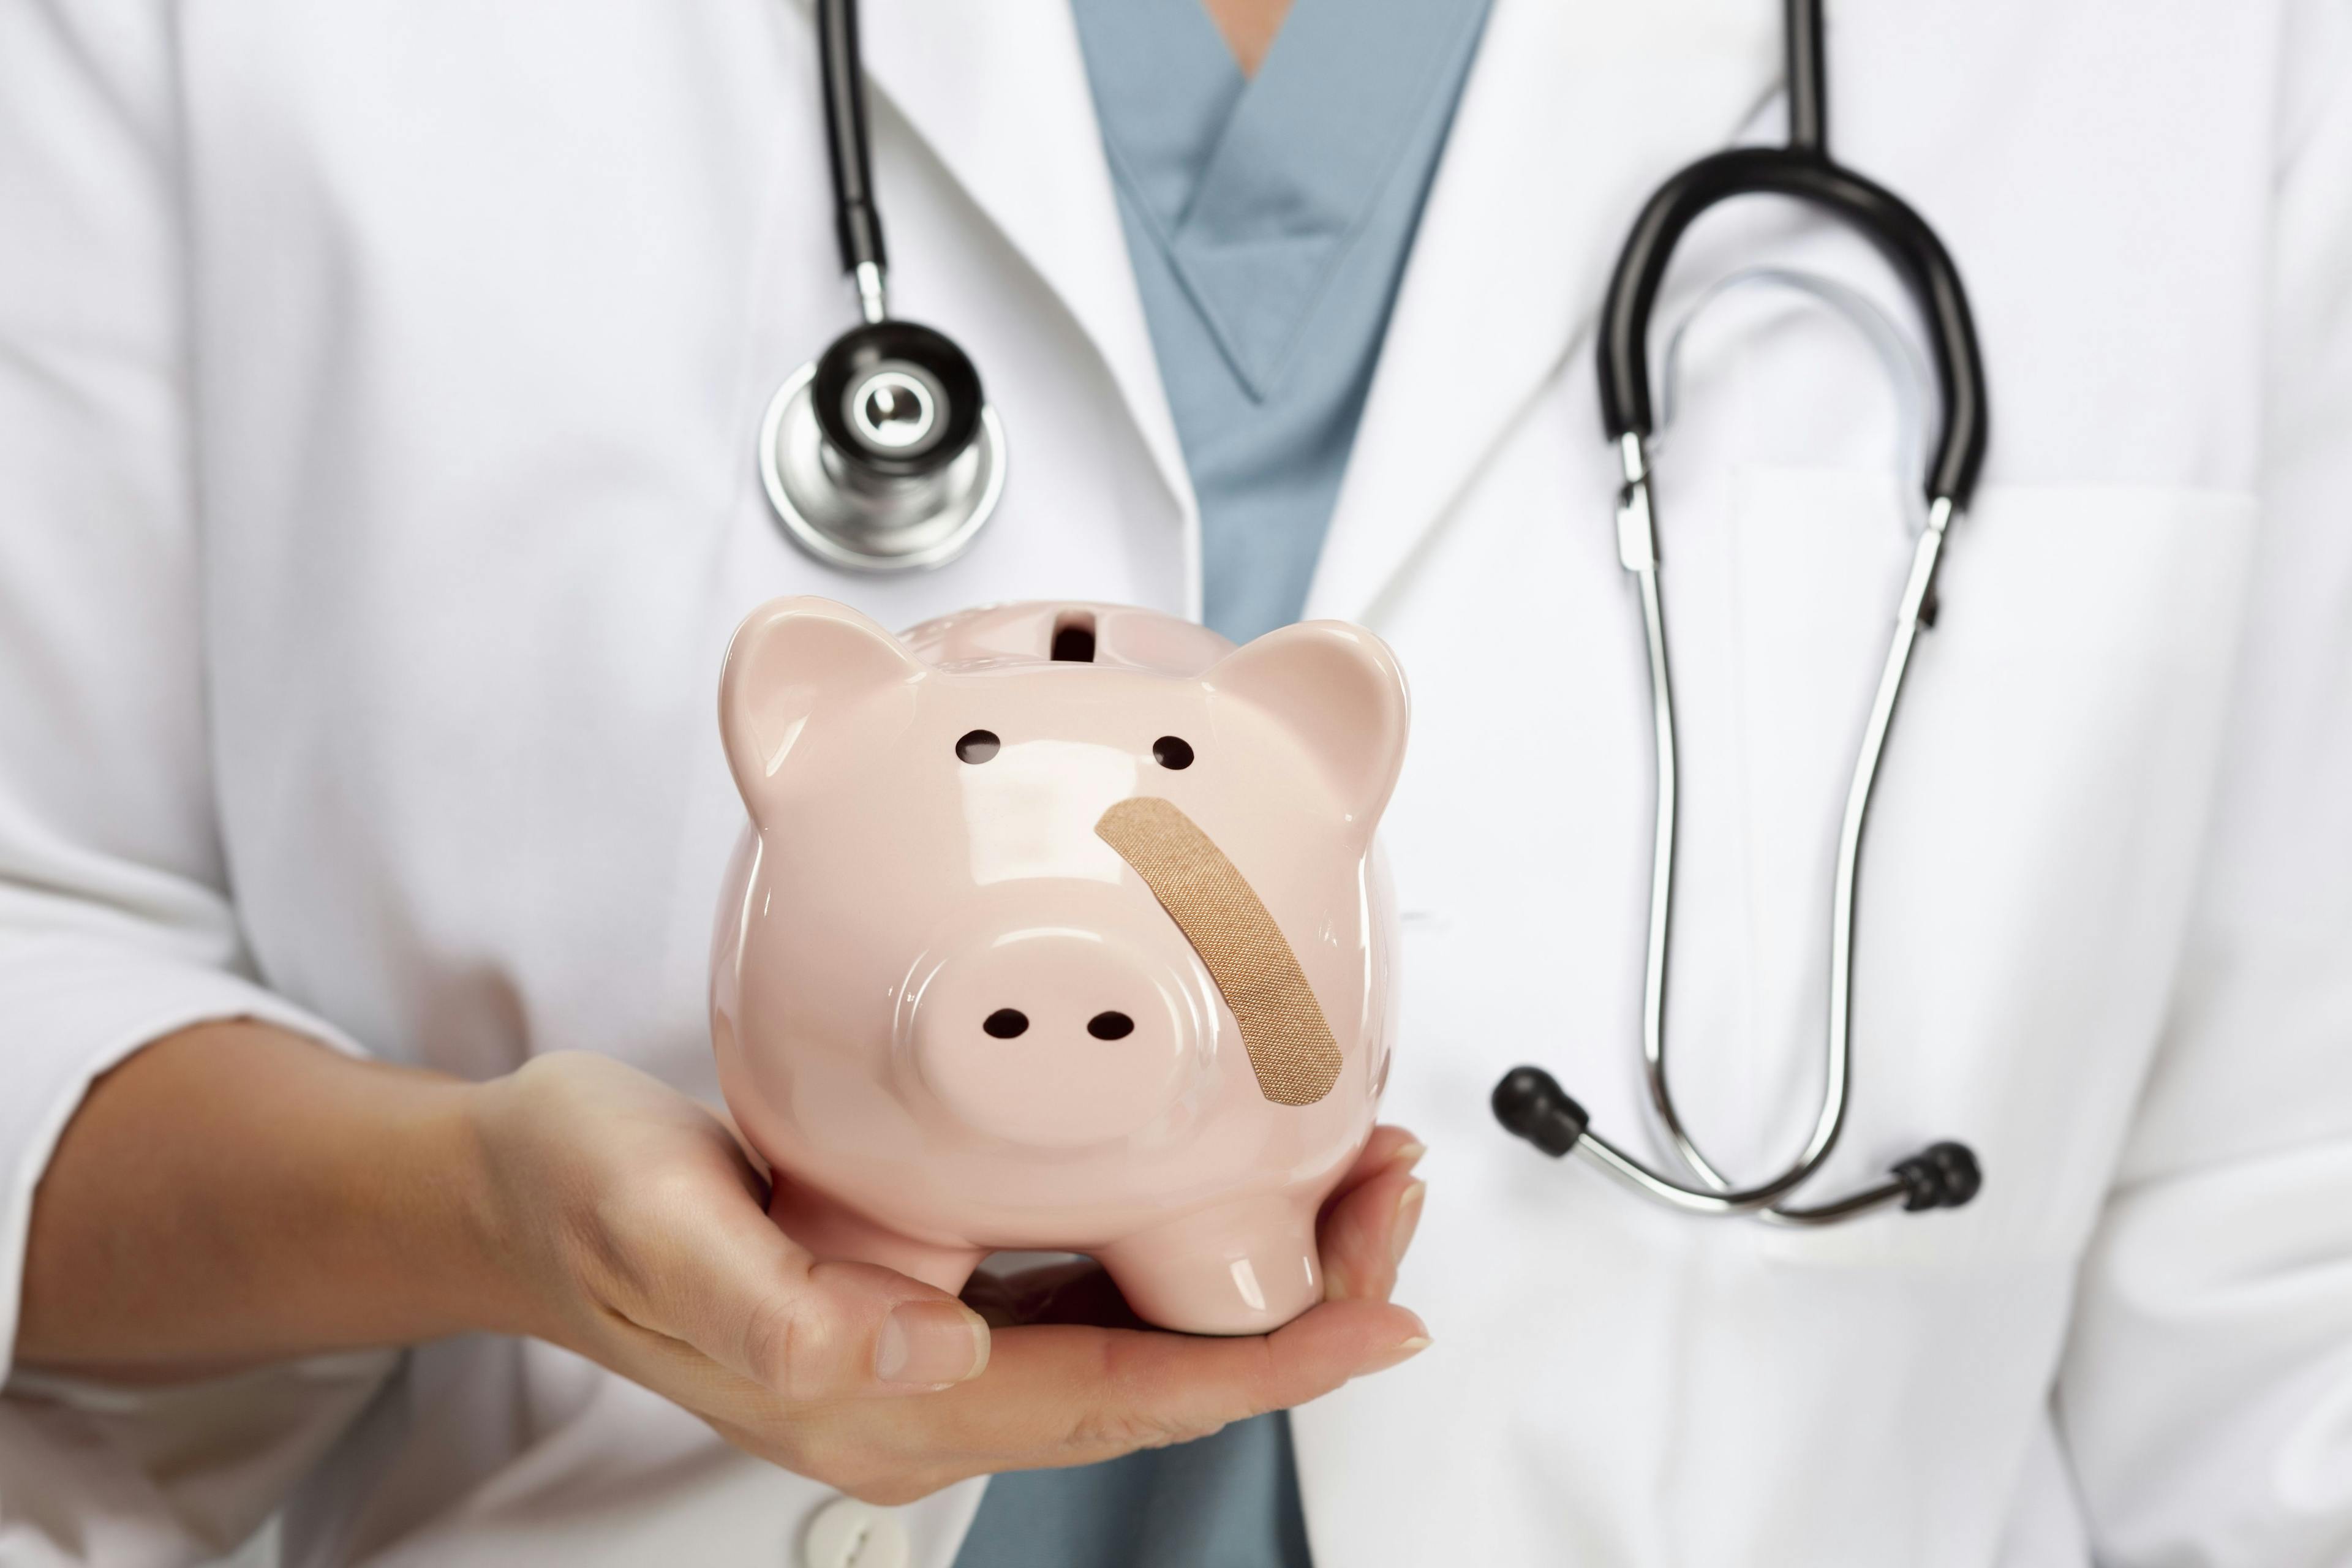 Study: Pay gap slightly narrowed for primary care, specialist under ACA